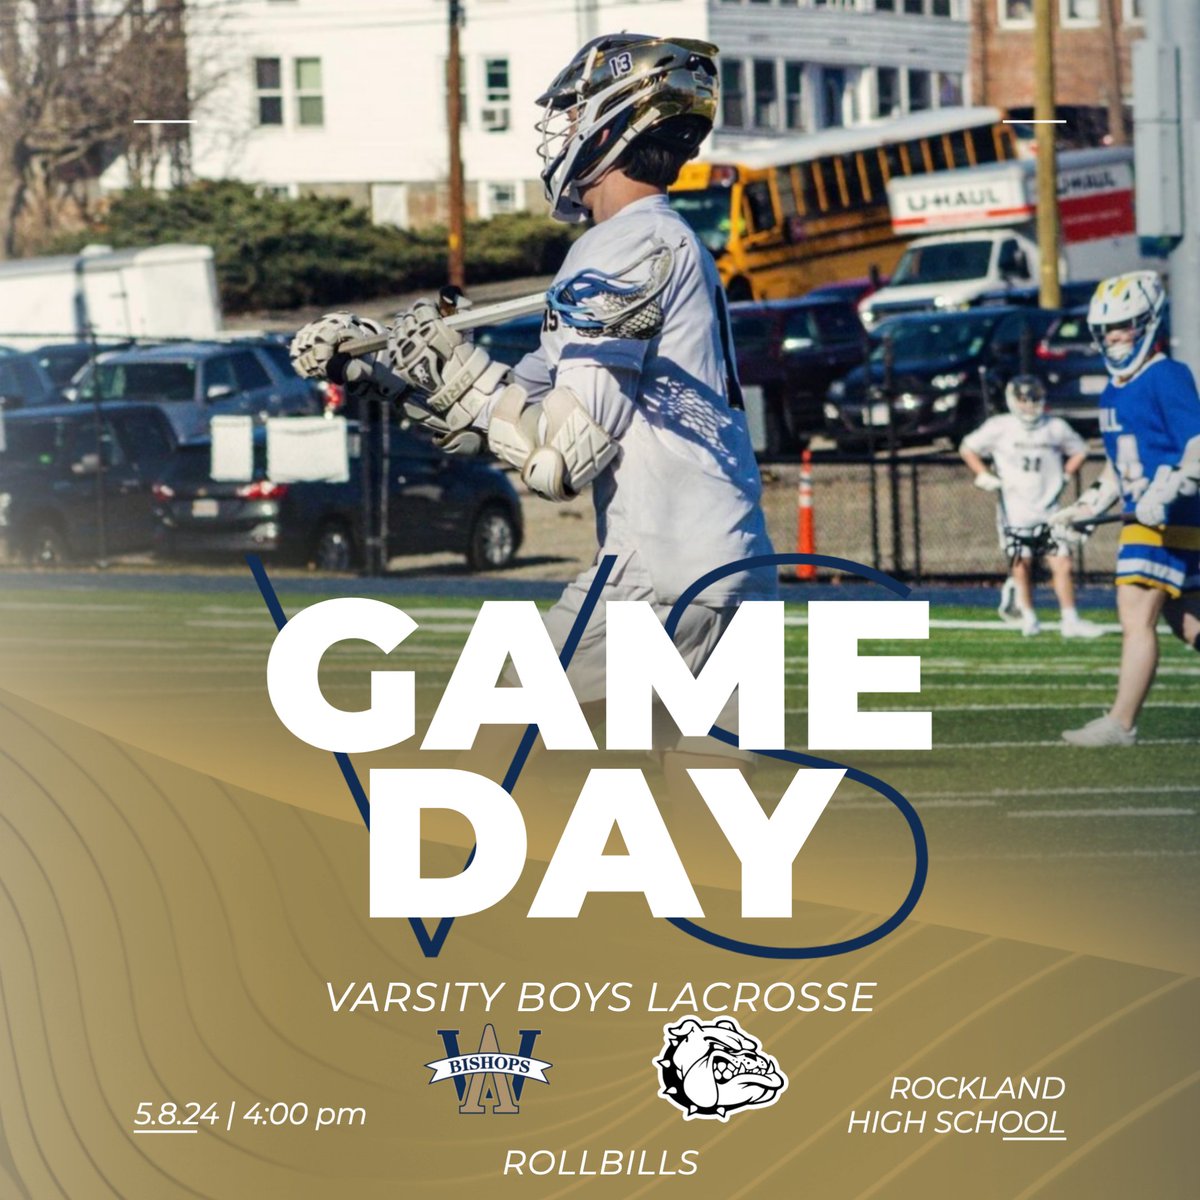 BOYS LACROSSE: The Bishops head to @rocklanddogs today for a non league matchup! Varsity at 4pm and JV to follow at 5:30pm! #rollbills @awhs_boyslax